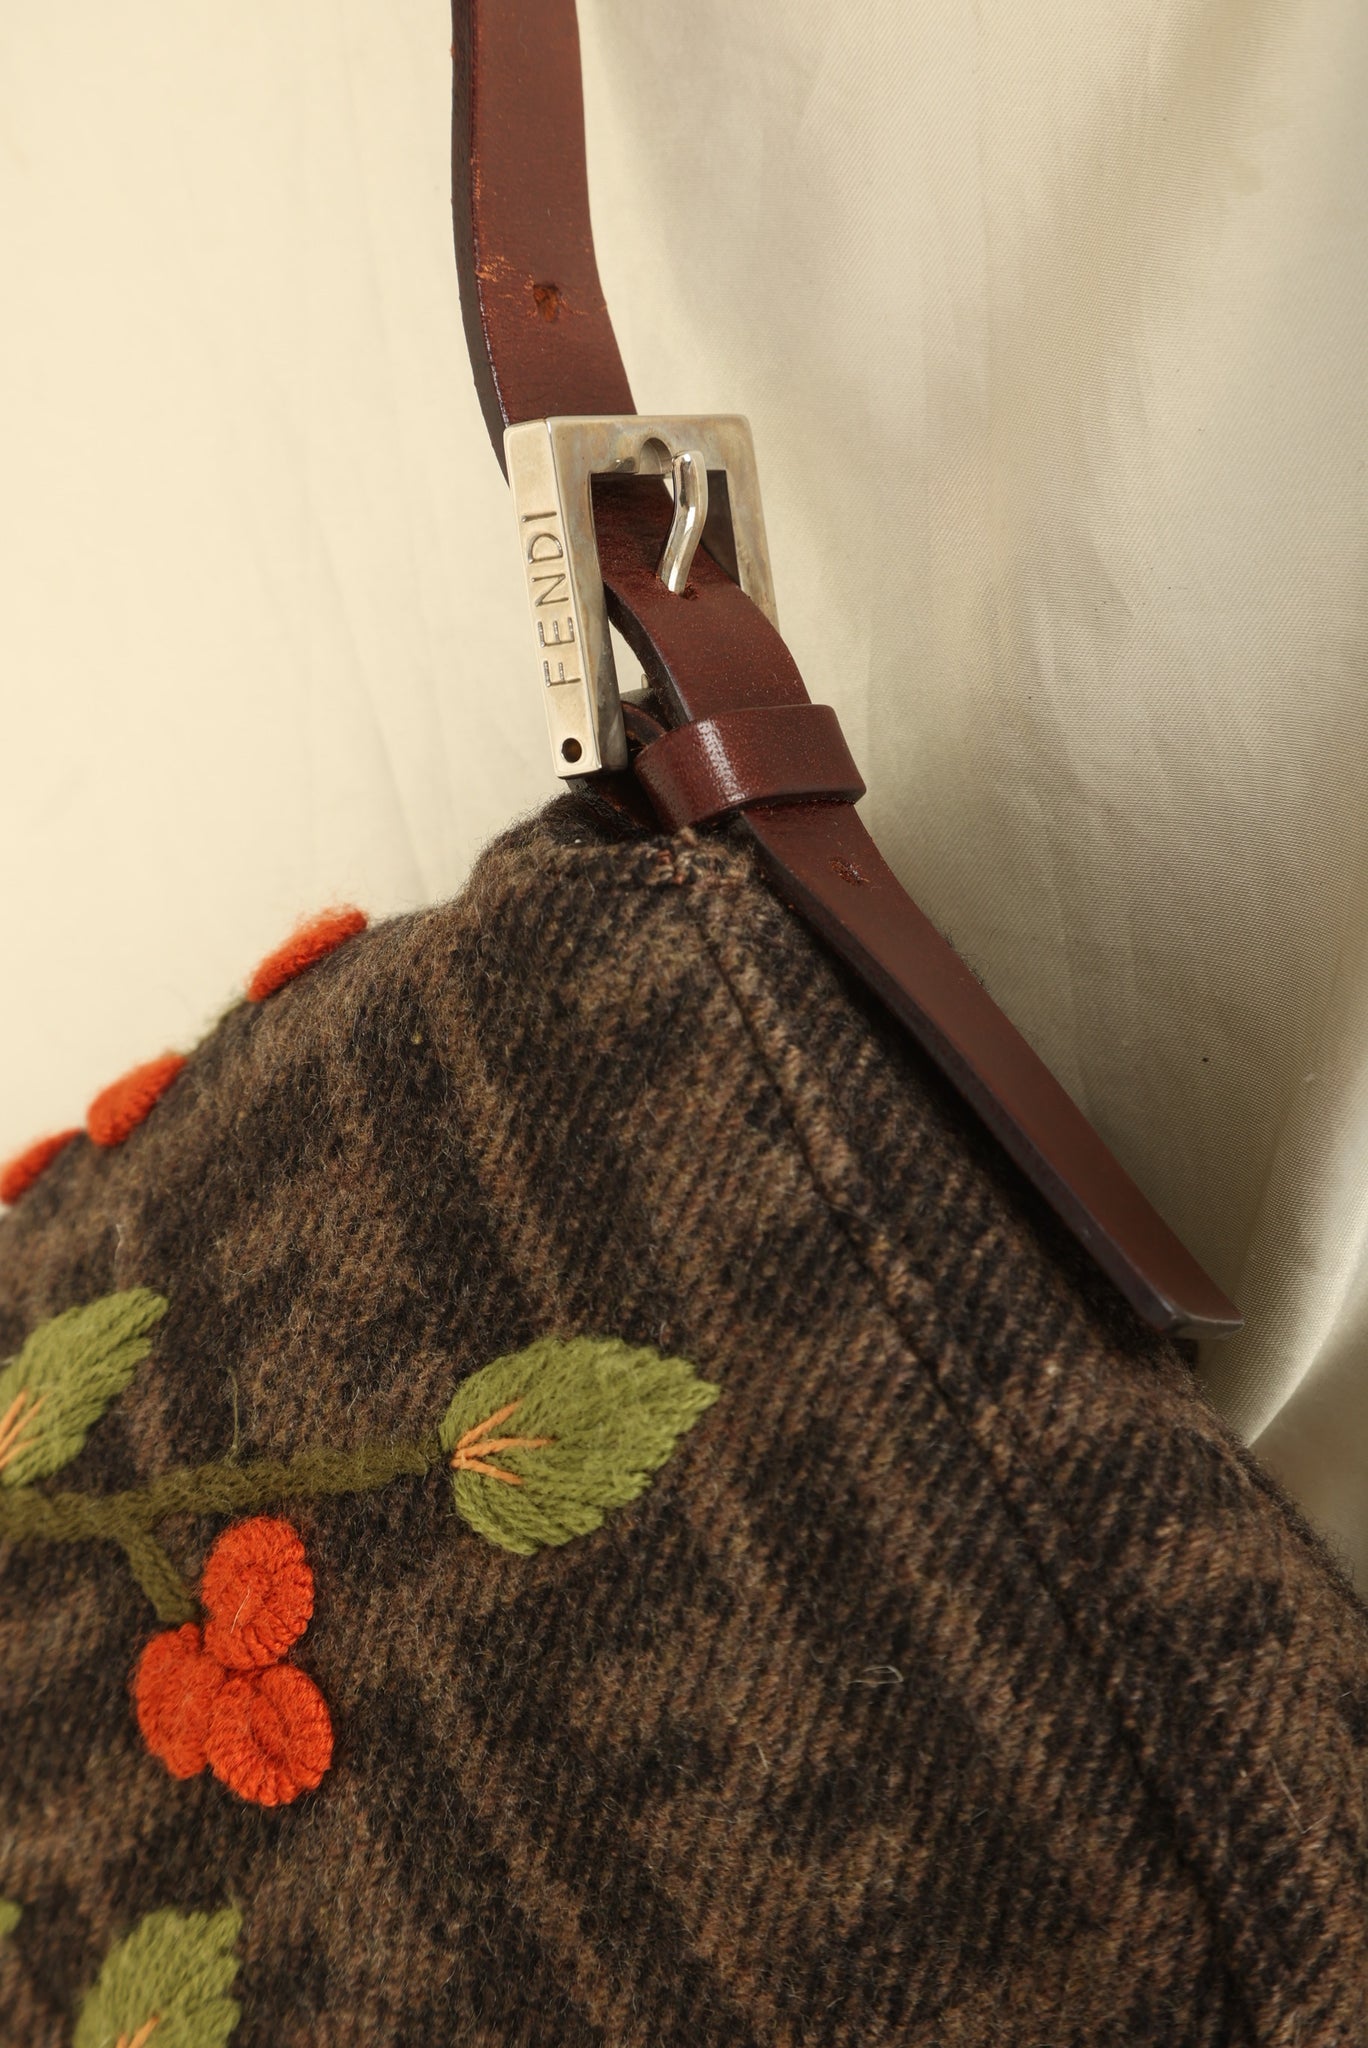 Extremely Rare Fendi Wool Zucca Embroidered Baguette